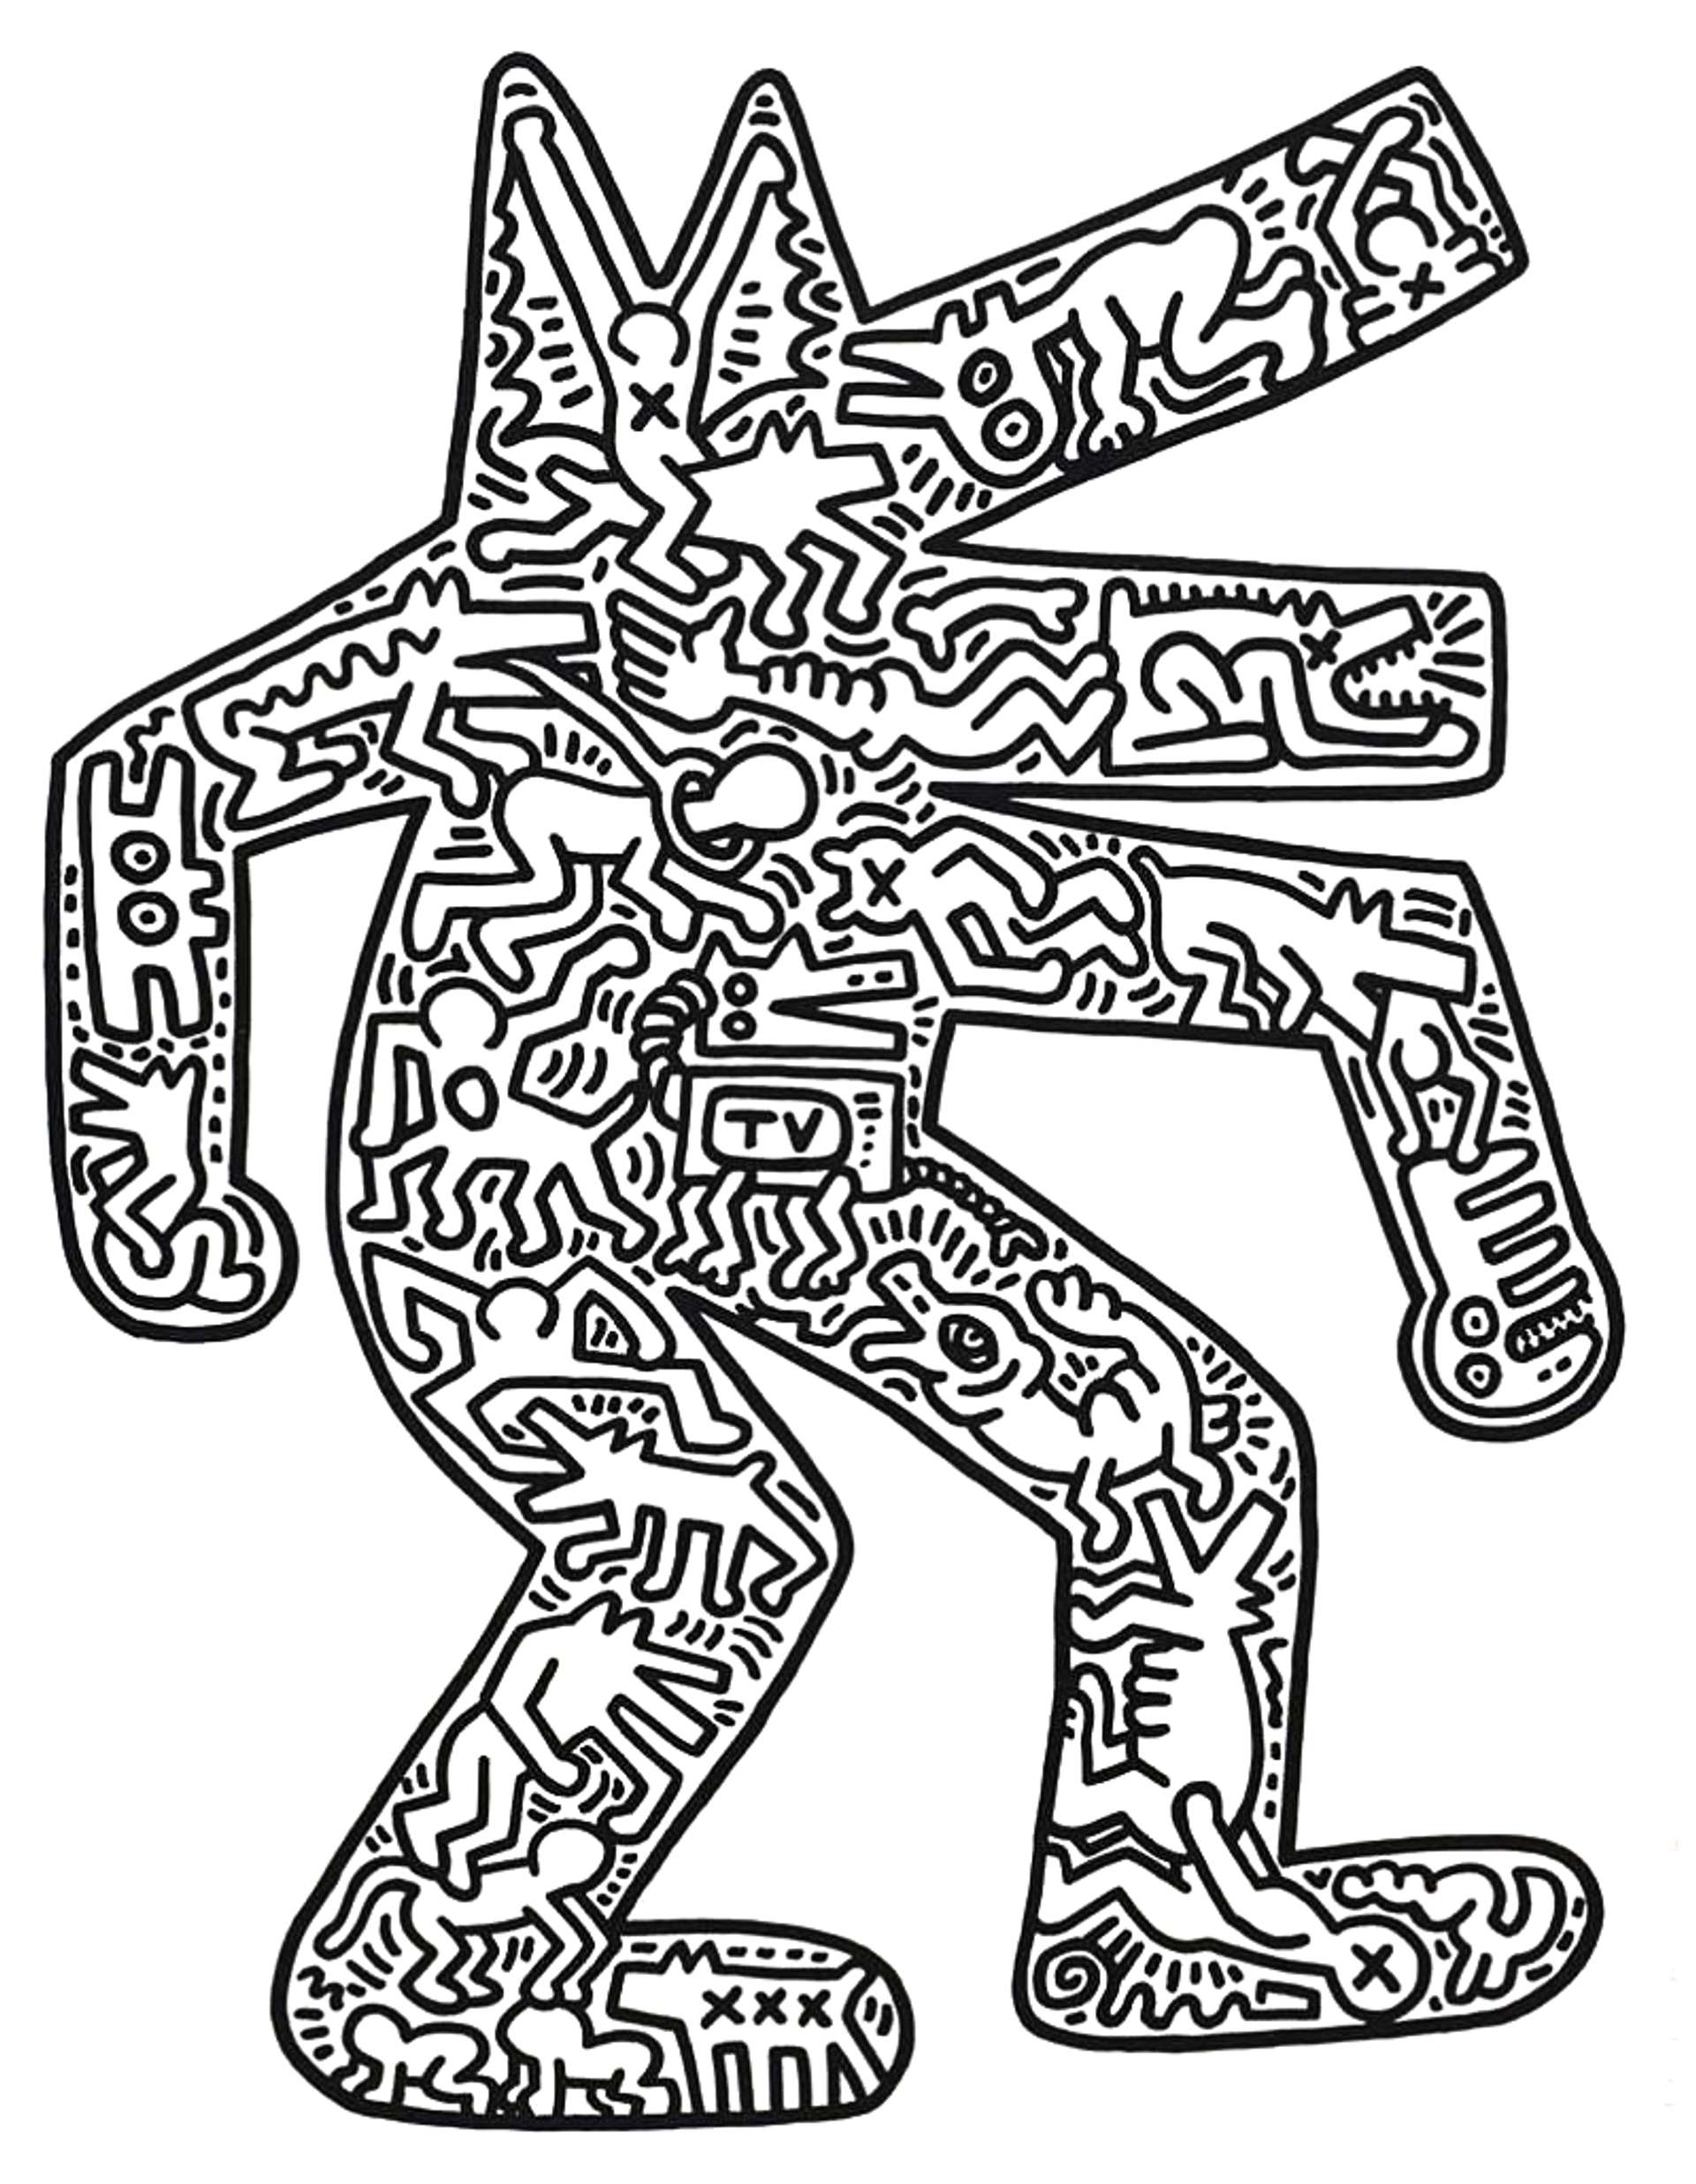 10 Facts About Keith Haring's Dog